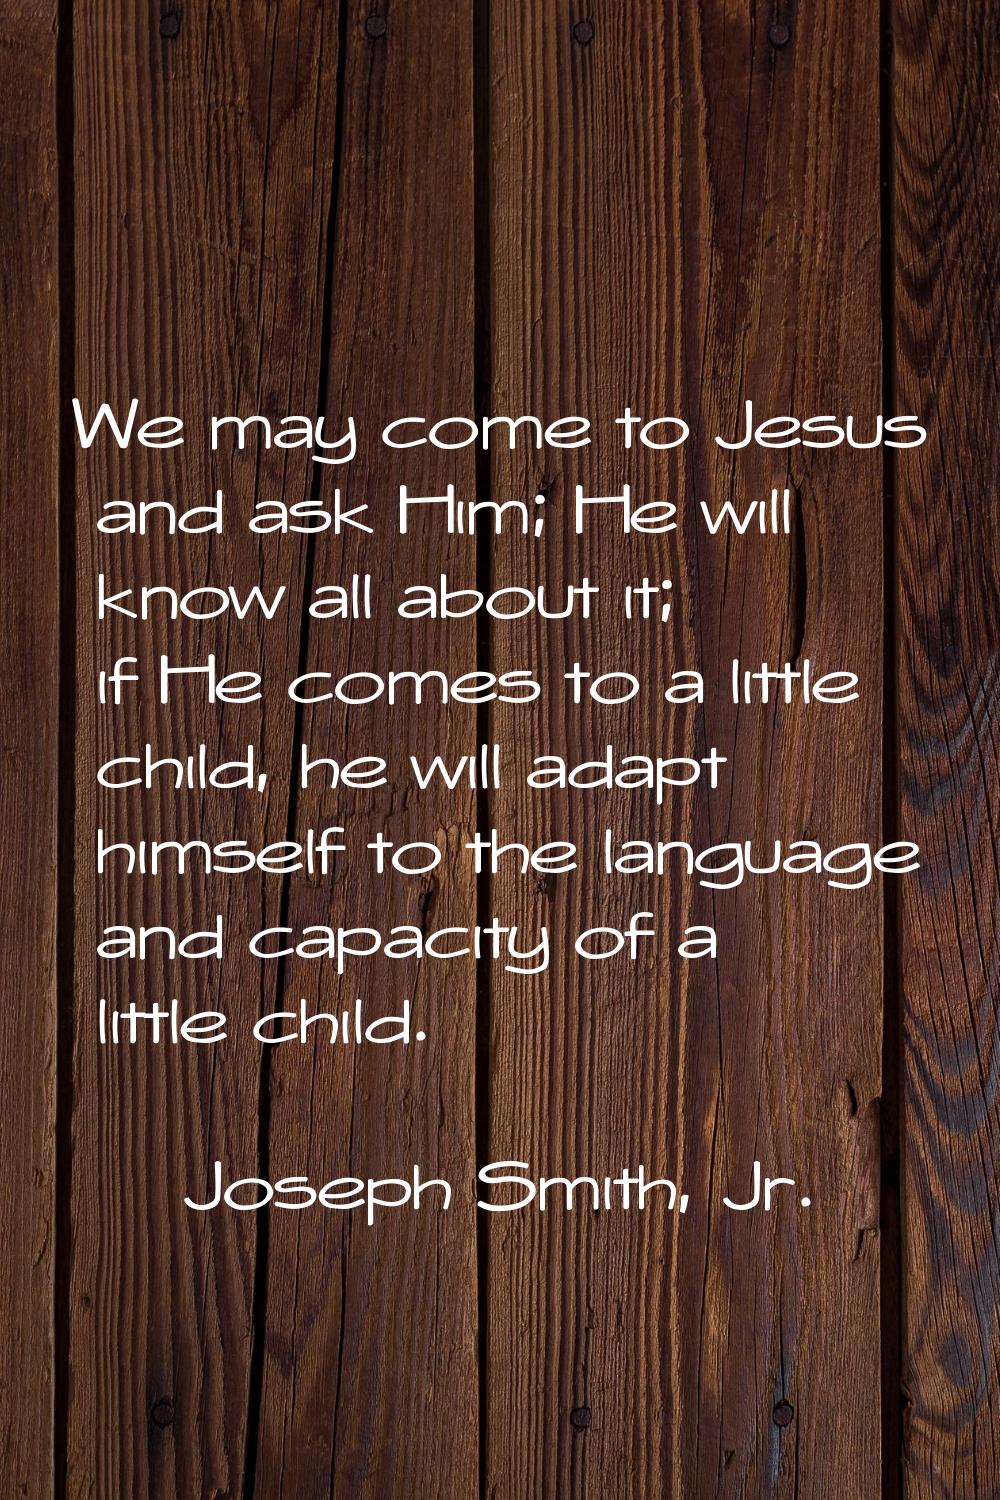 We may come to Jesus and ask Him; He will know all about it; if He comes to a little child, he will